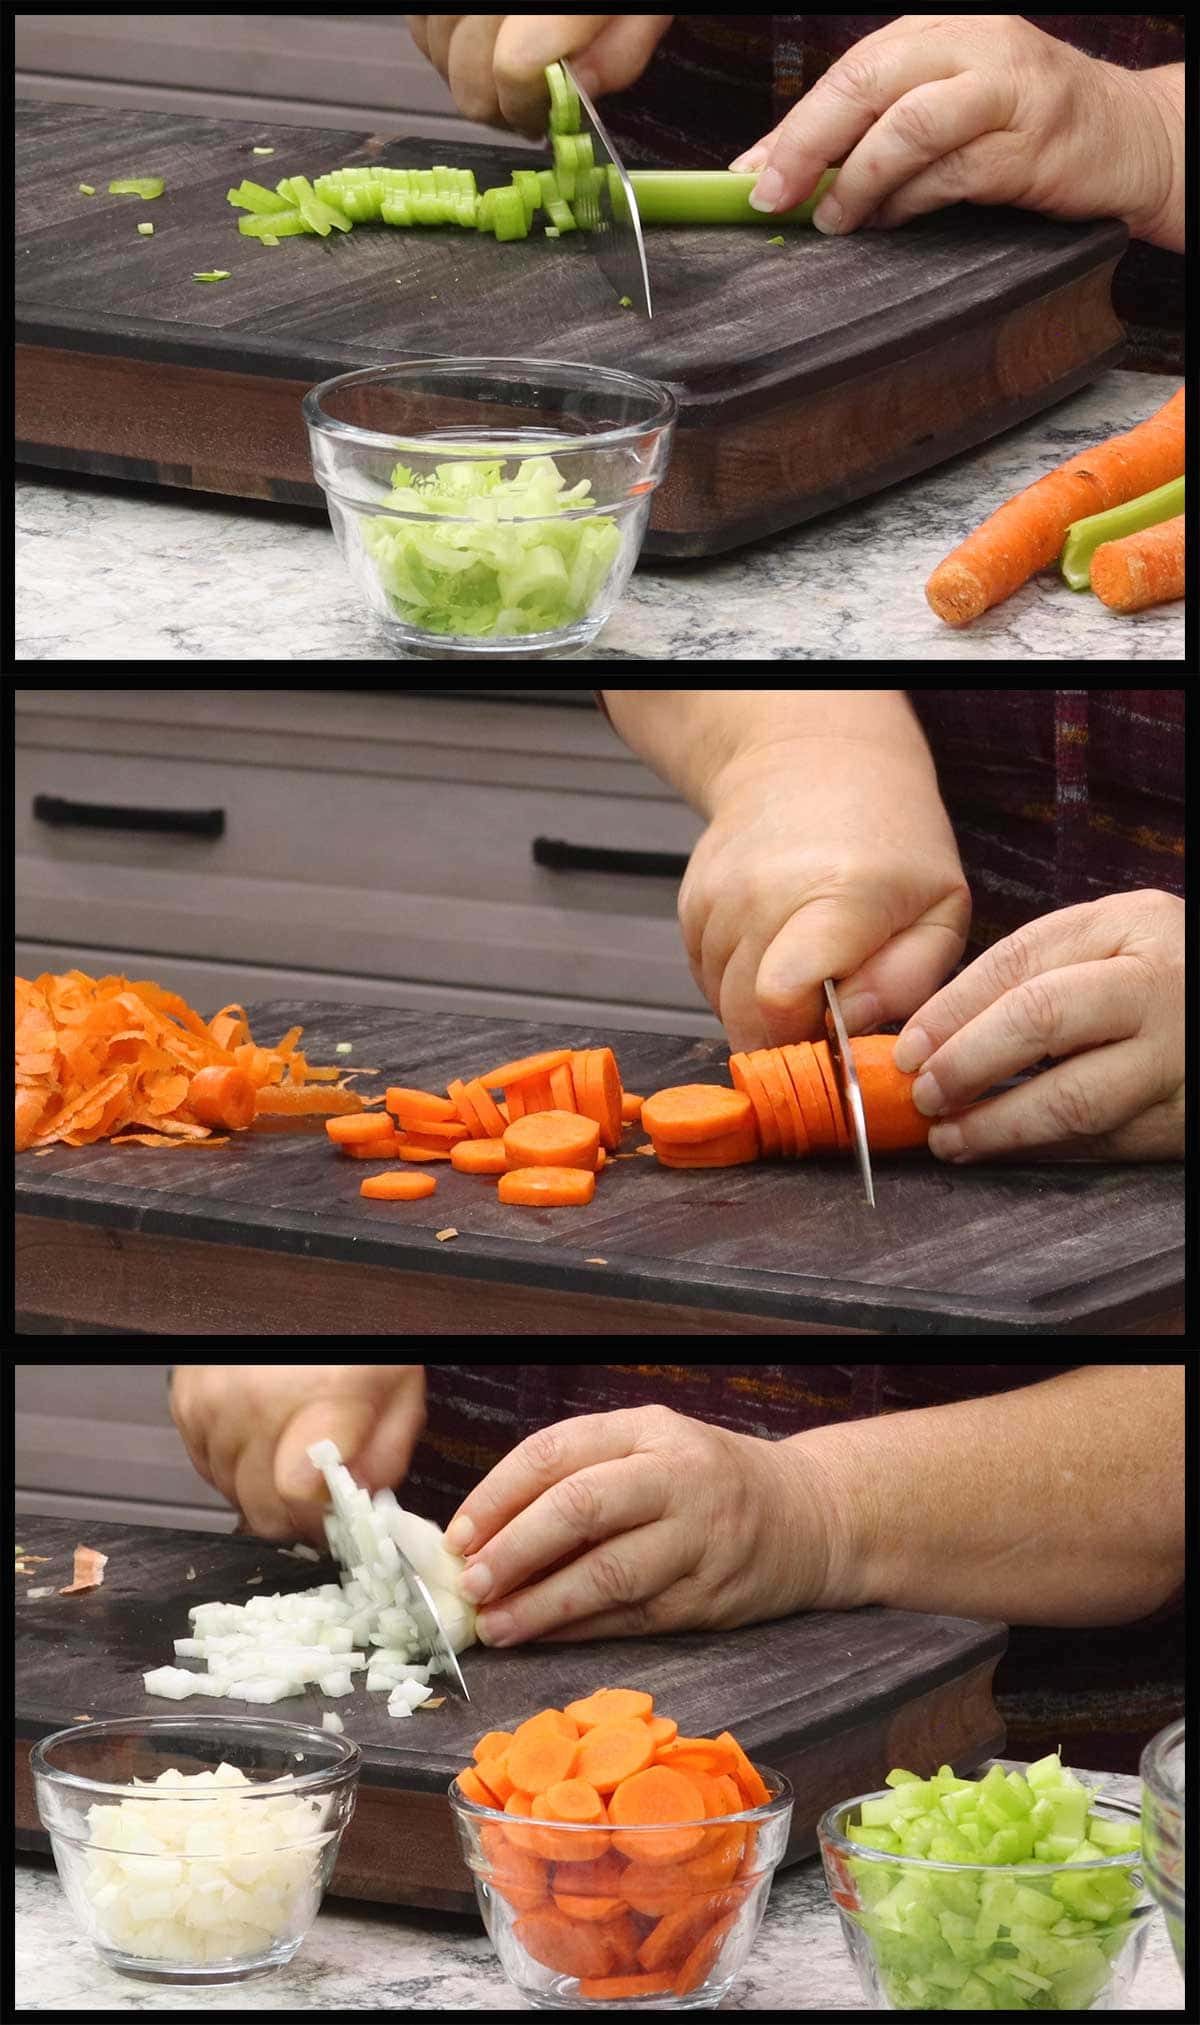 Preparing the vegetables for chicken and noodles.